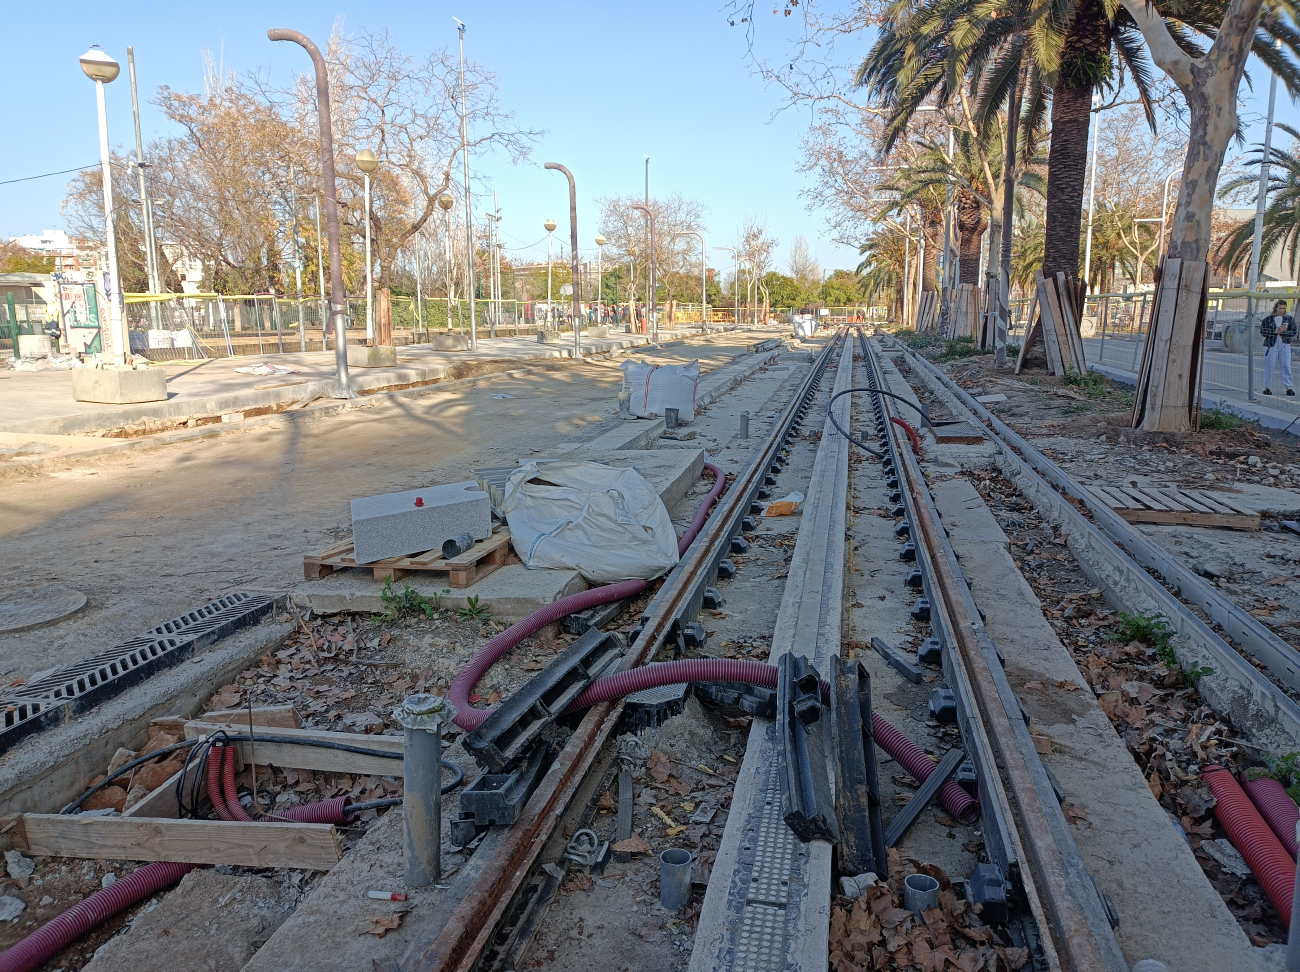 Barcelona — Construction of the connection between the two tram lines on Diagonal